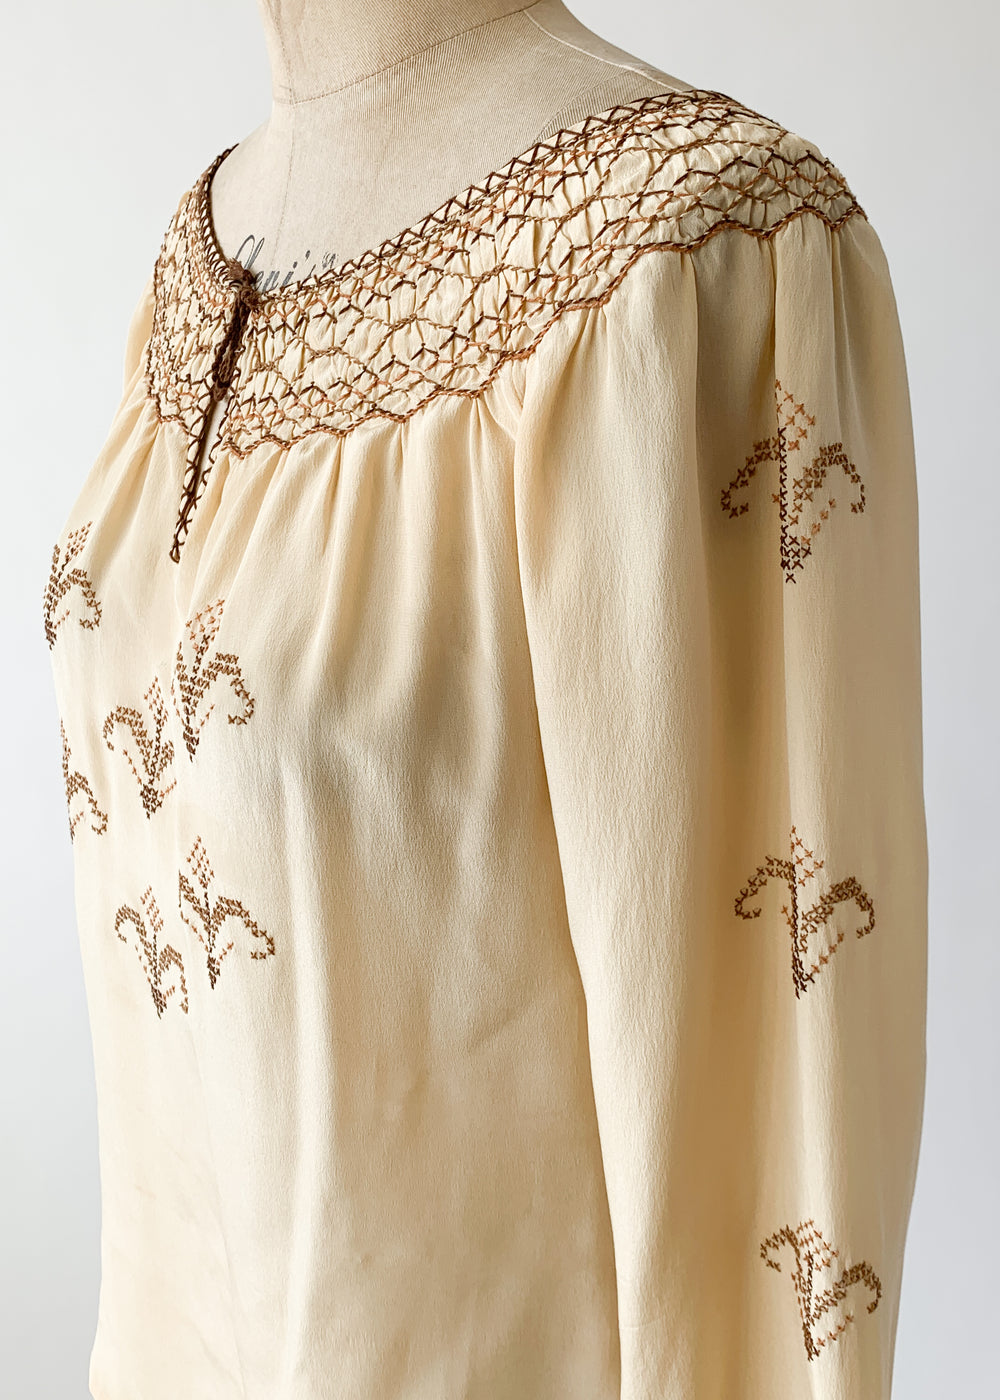 Vintage 1930s Embroidered Silk Blouse - Raleigh Vintage